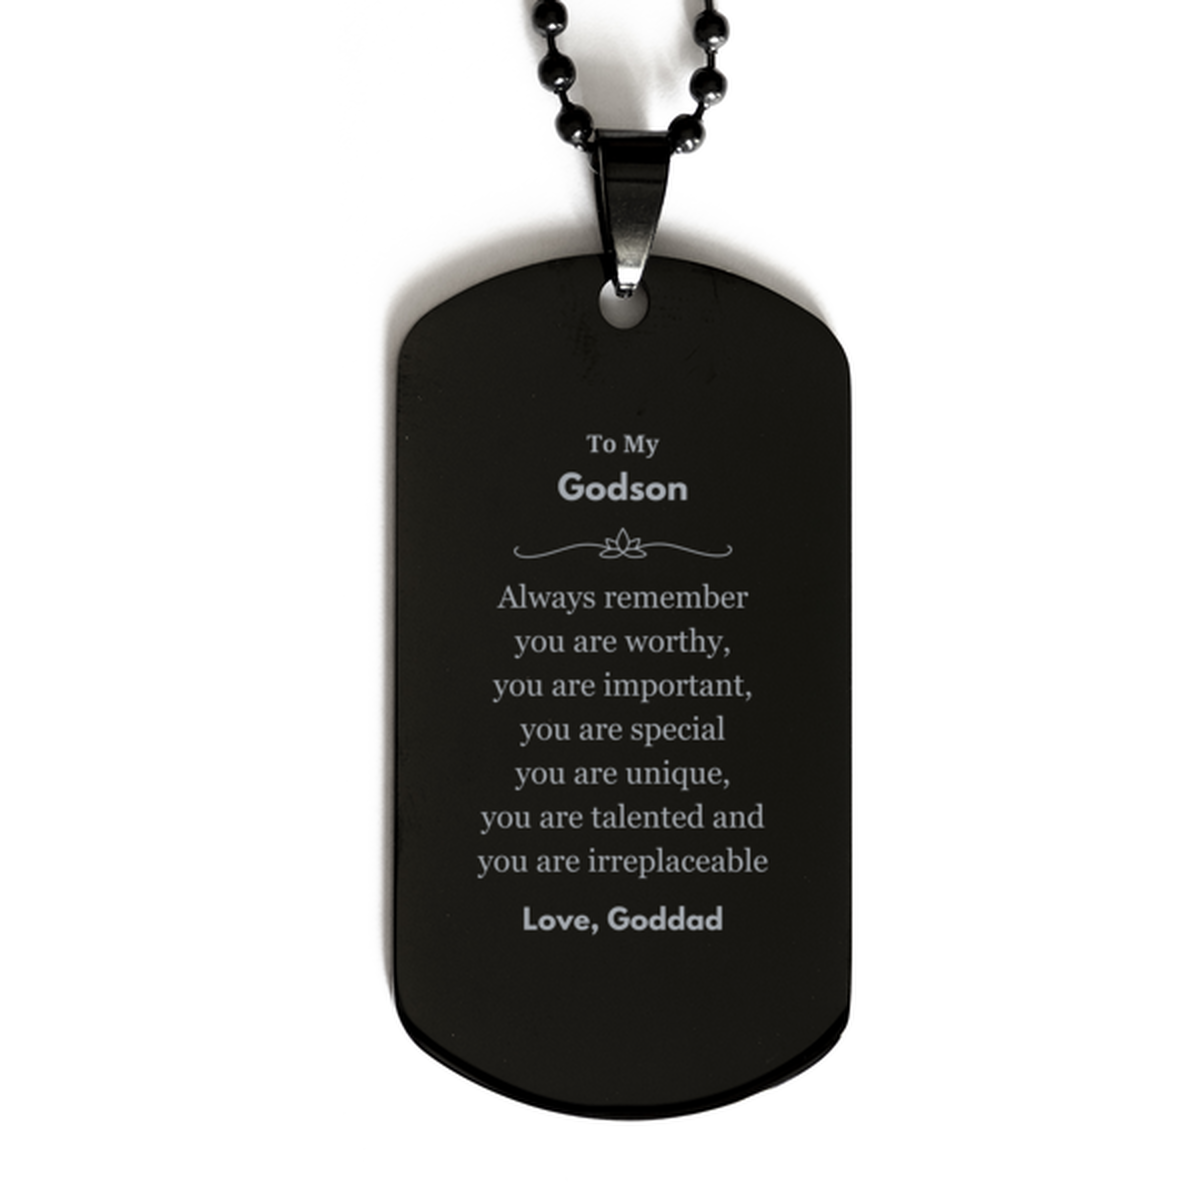 Godson Birthday Gifts from Goddad, Inspirational Black Dog Tag for Godson Christmas Graduation Gifts for Godson Always remember you are worthy, you are important. Love, Goddad